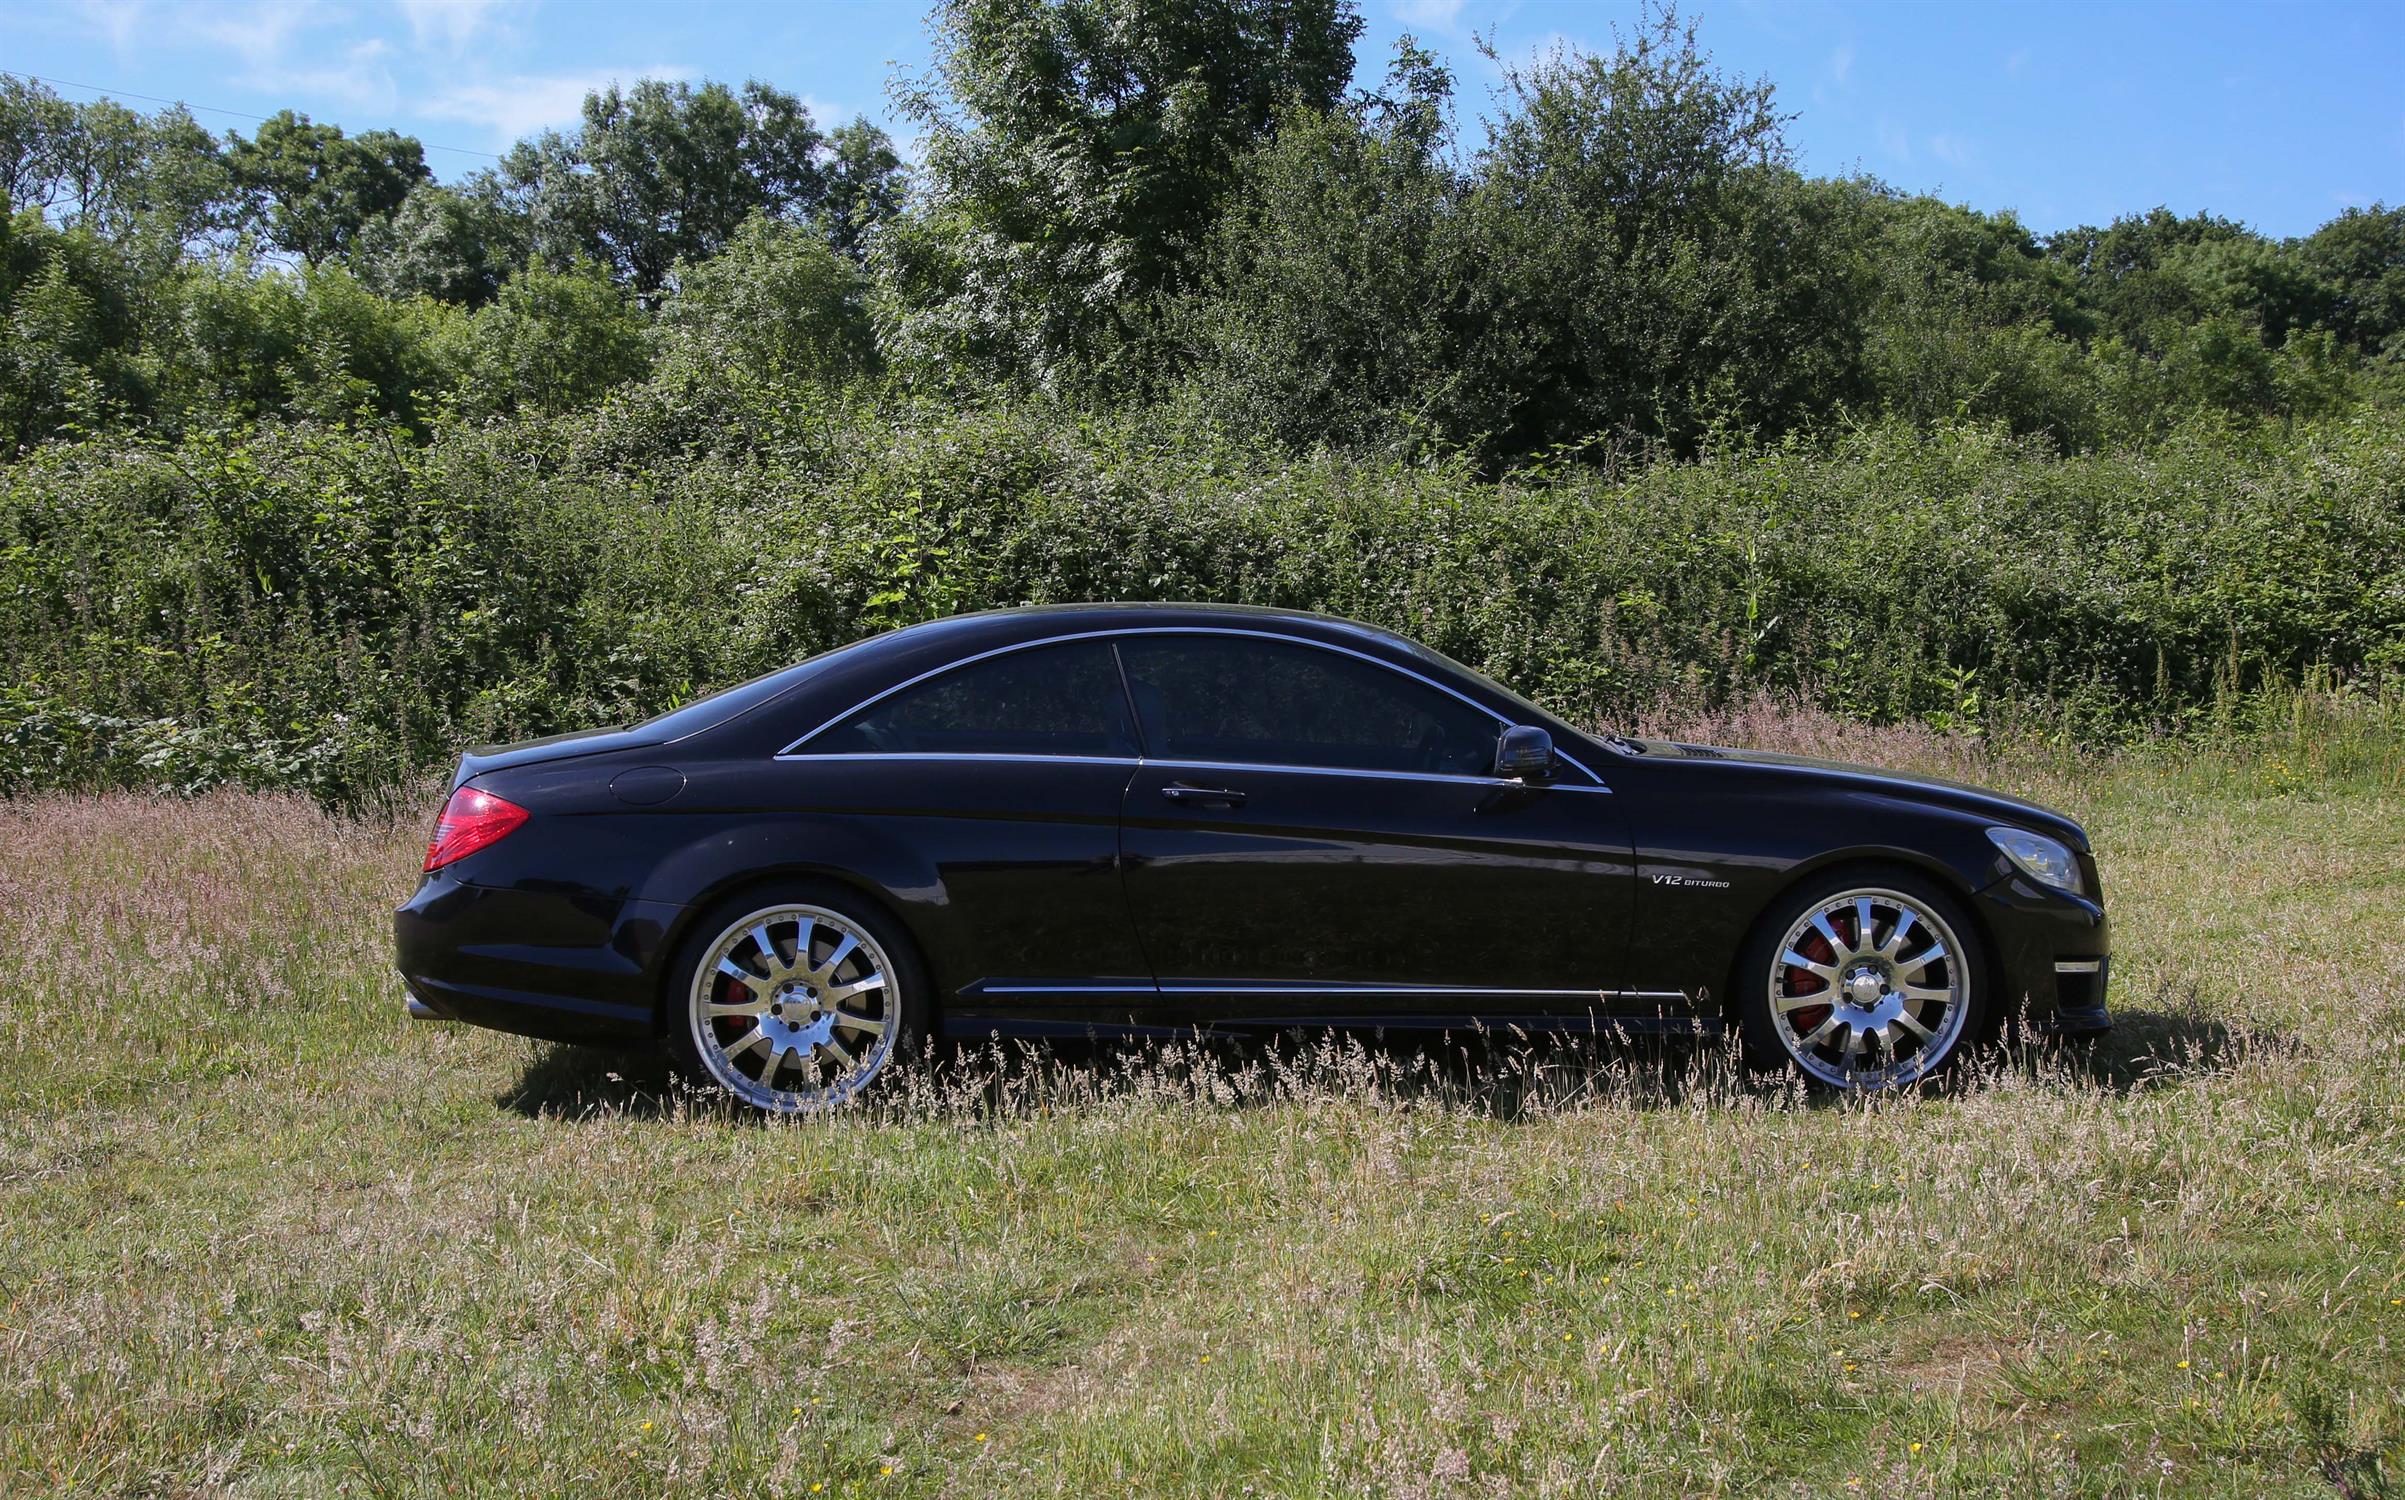 Mercedes’ CL65 amg 6.0 v12 twin turbo. In metallic black, reading around 170k miles. - Image 2 of 10